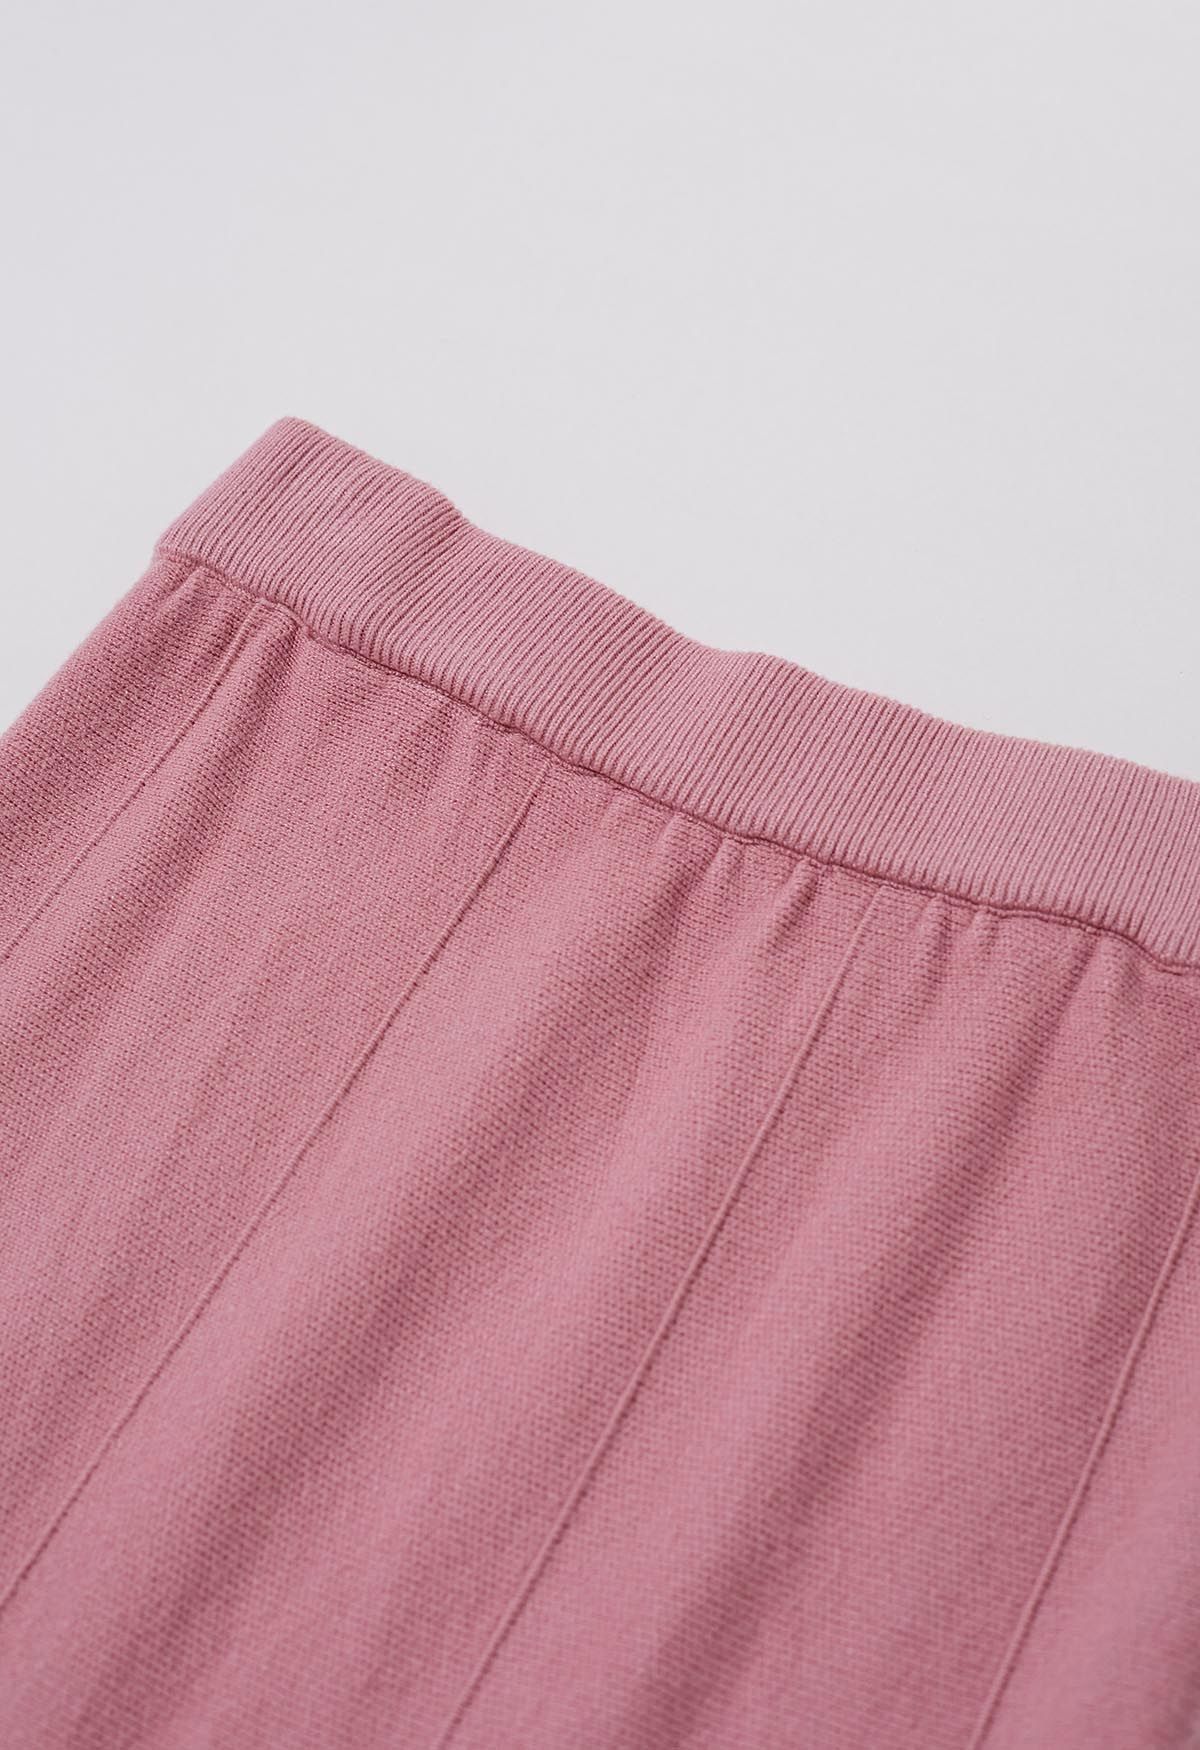 Frilling Hem Knit Midi Skirt in Pink - Retro, Indie and Unique Fashion